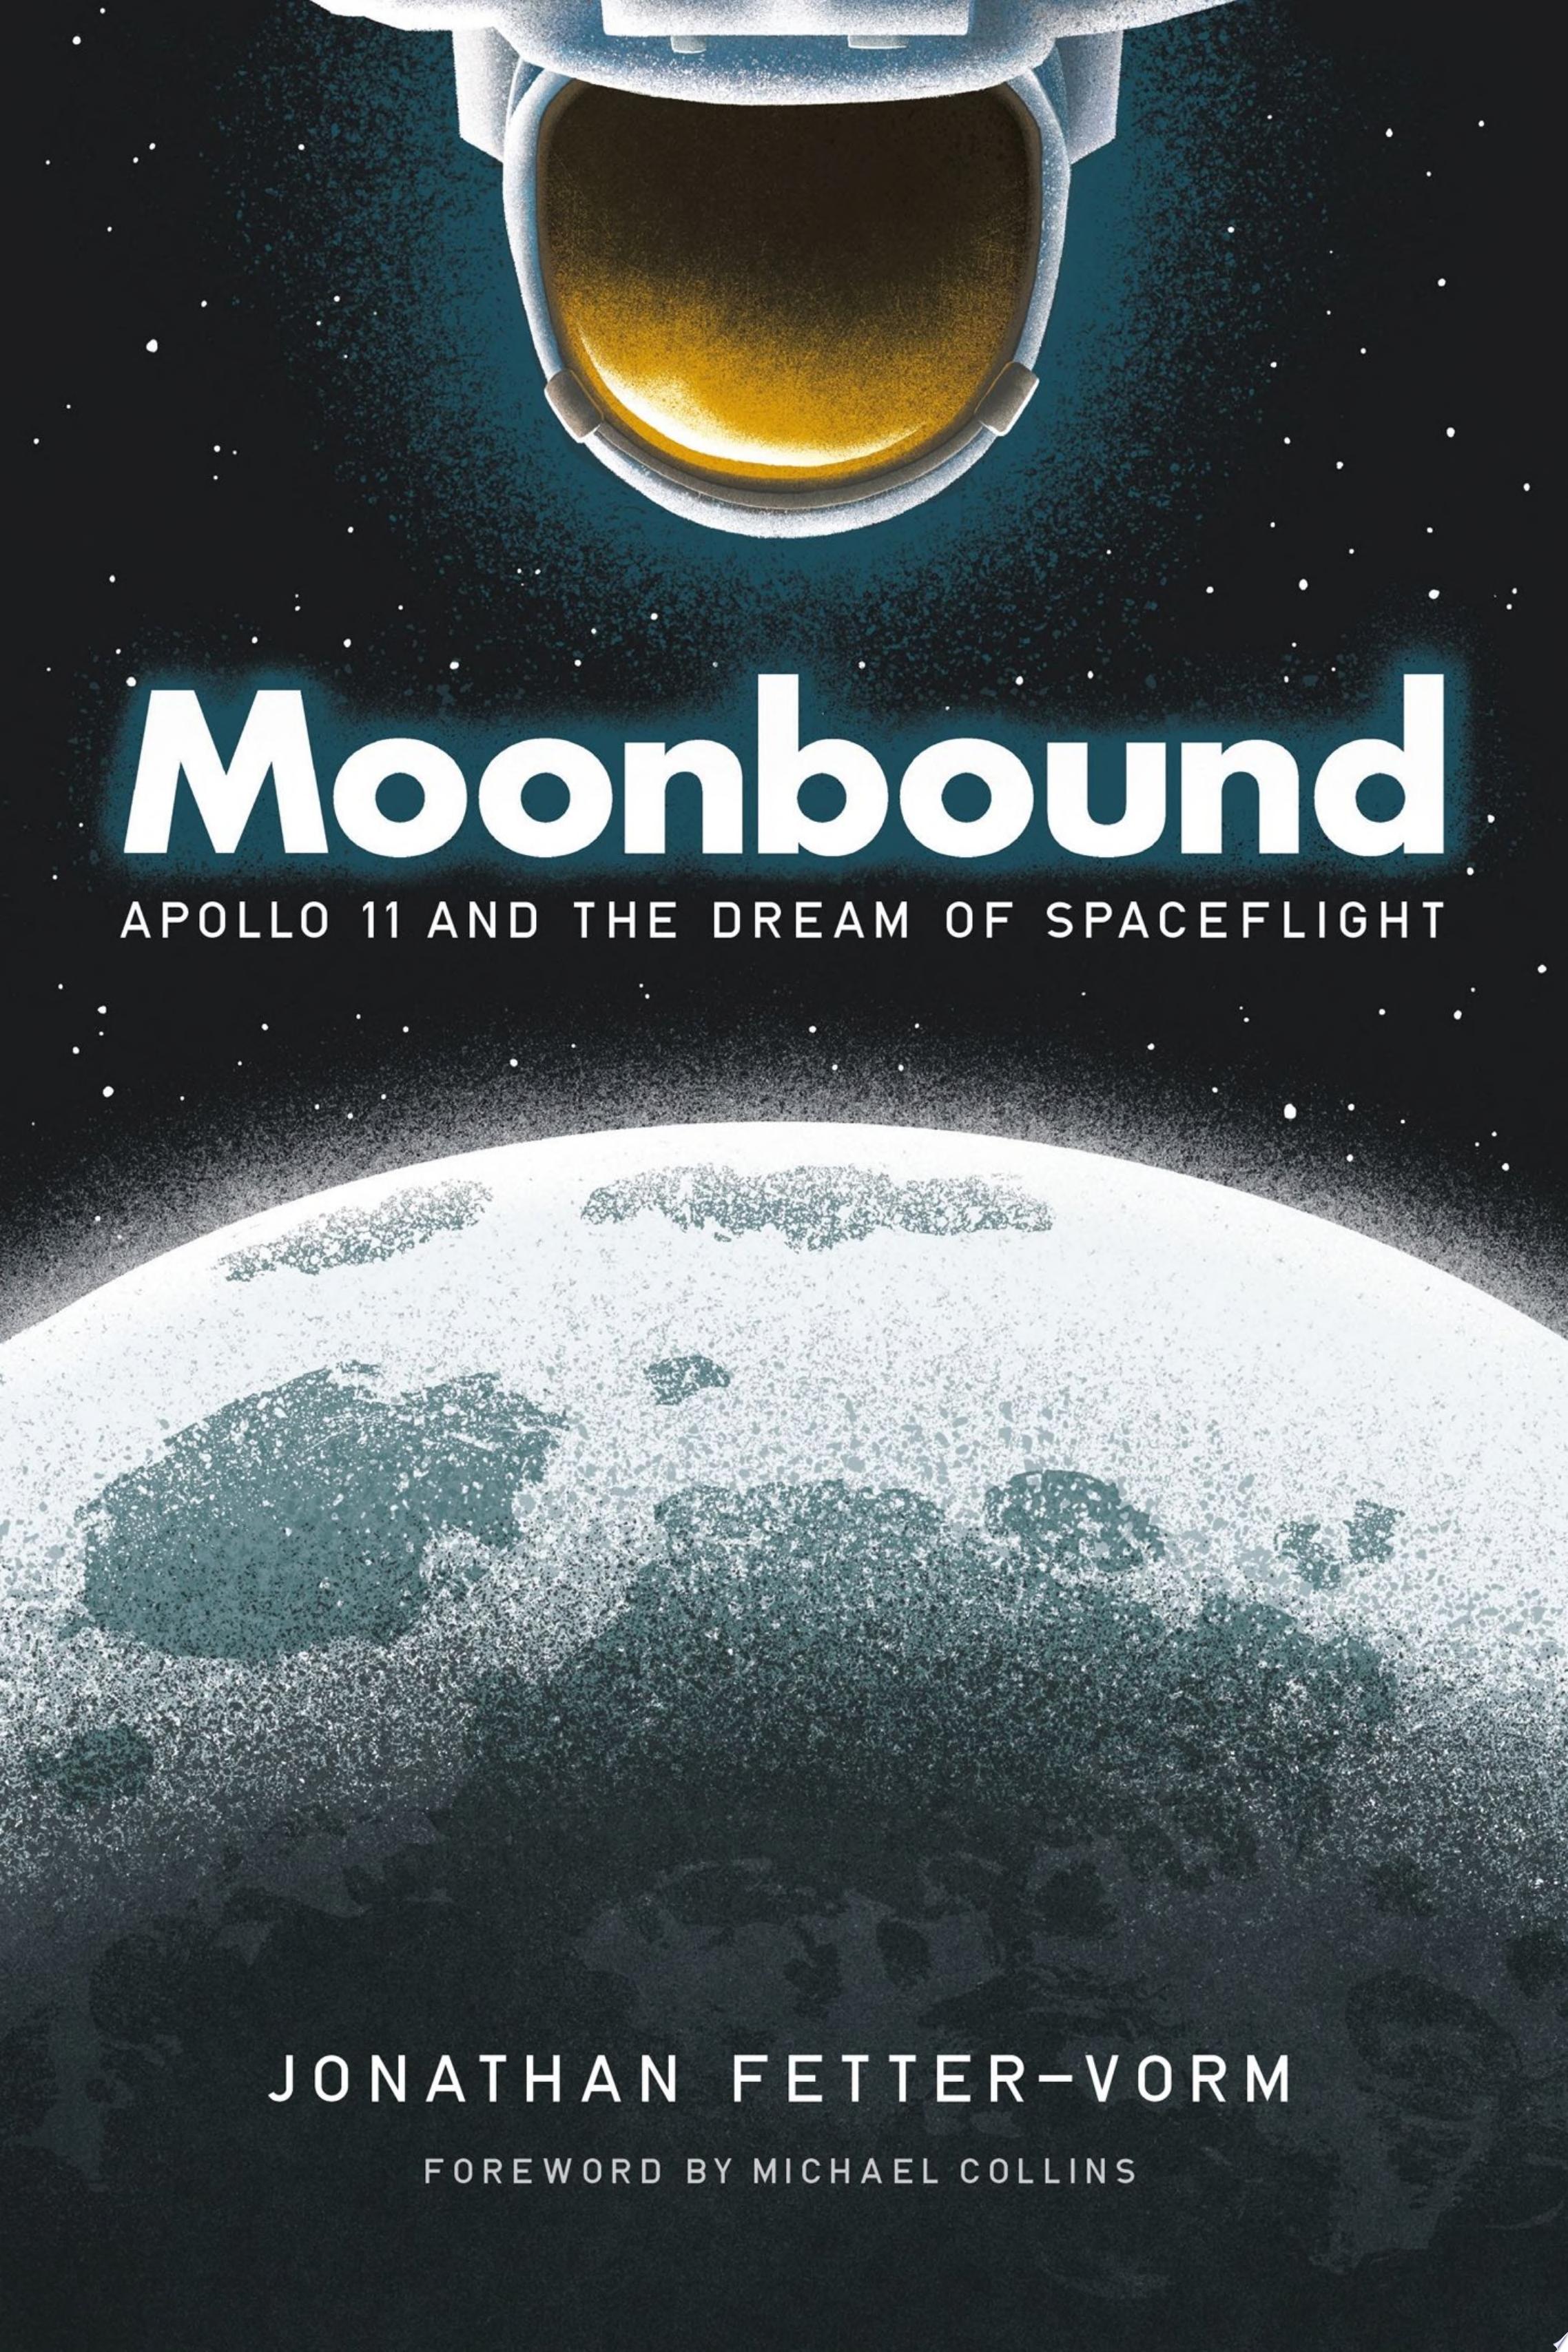 Image for "Moonbound"